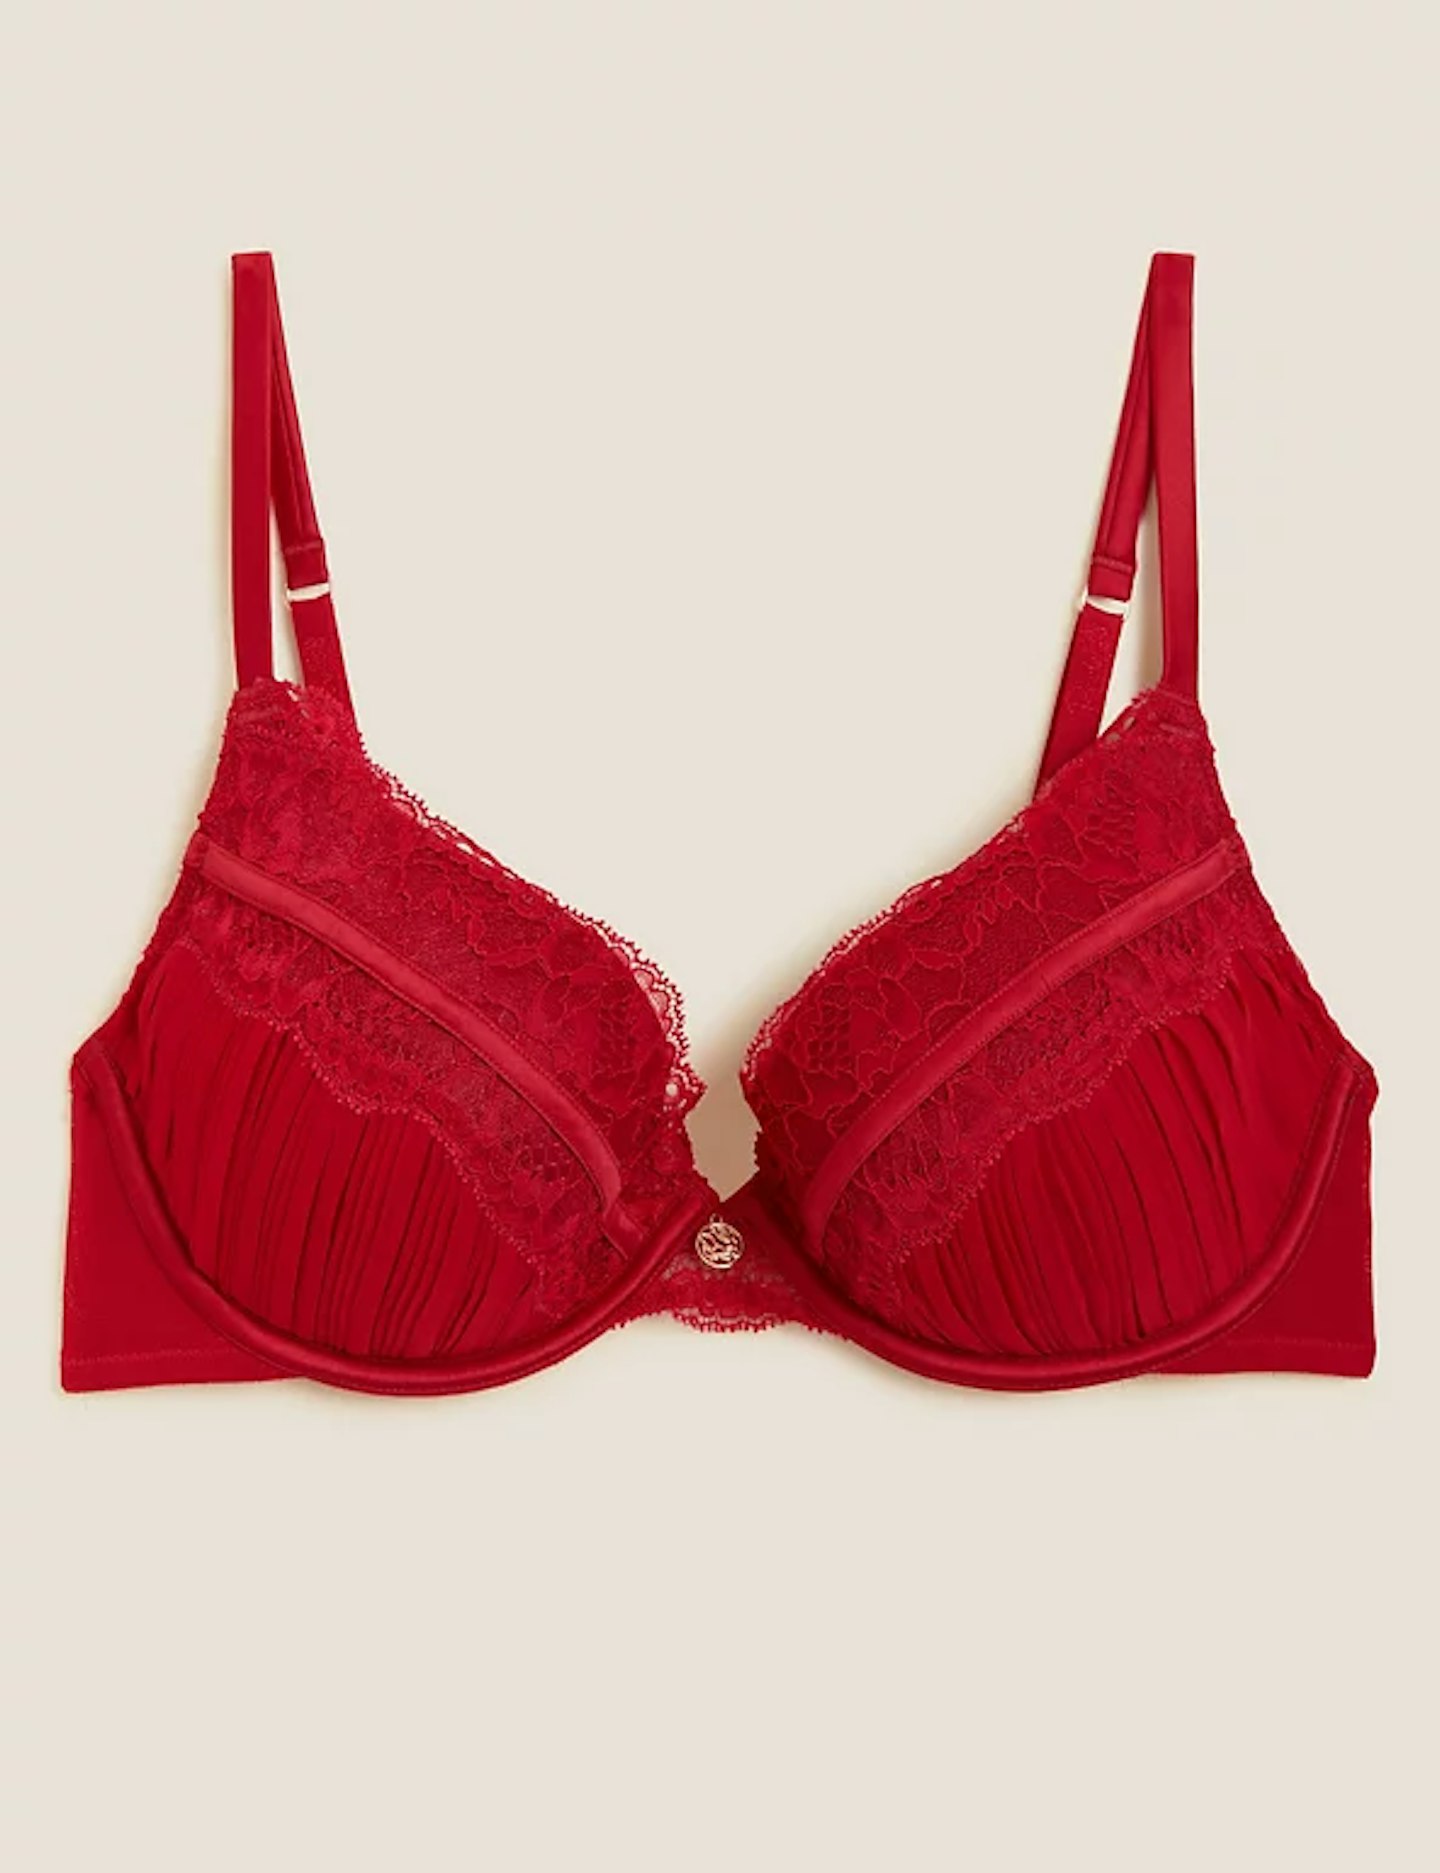 Marks & Spencer Rosie for Autograph new 30C 30D 30DD red high apex plunge  bra